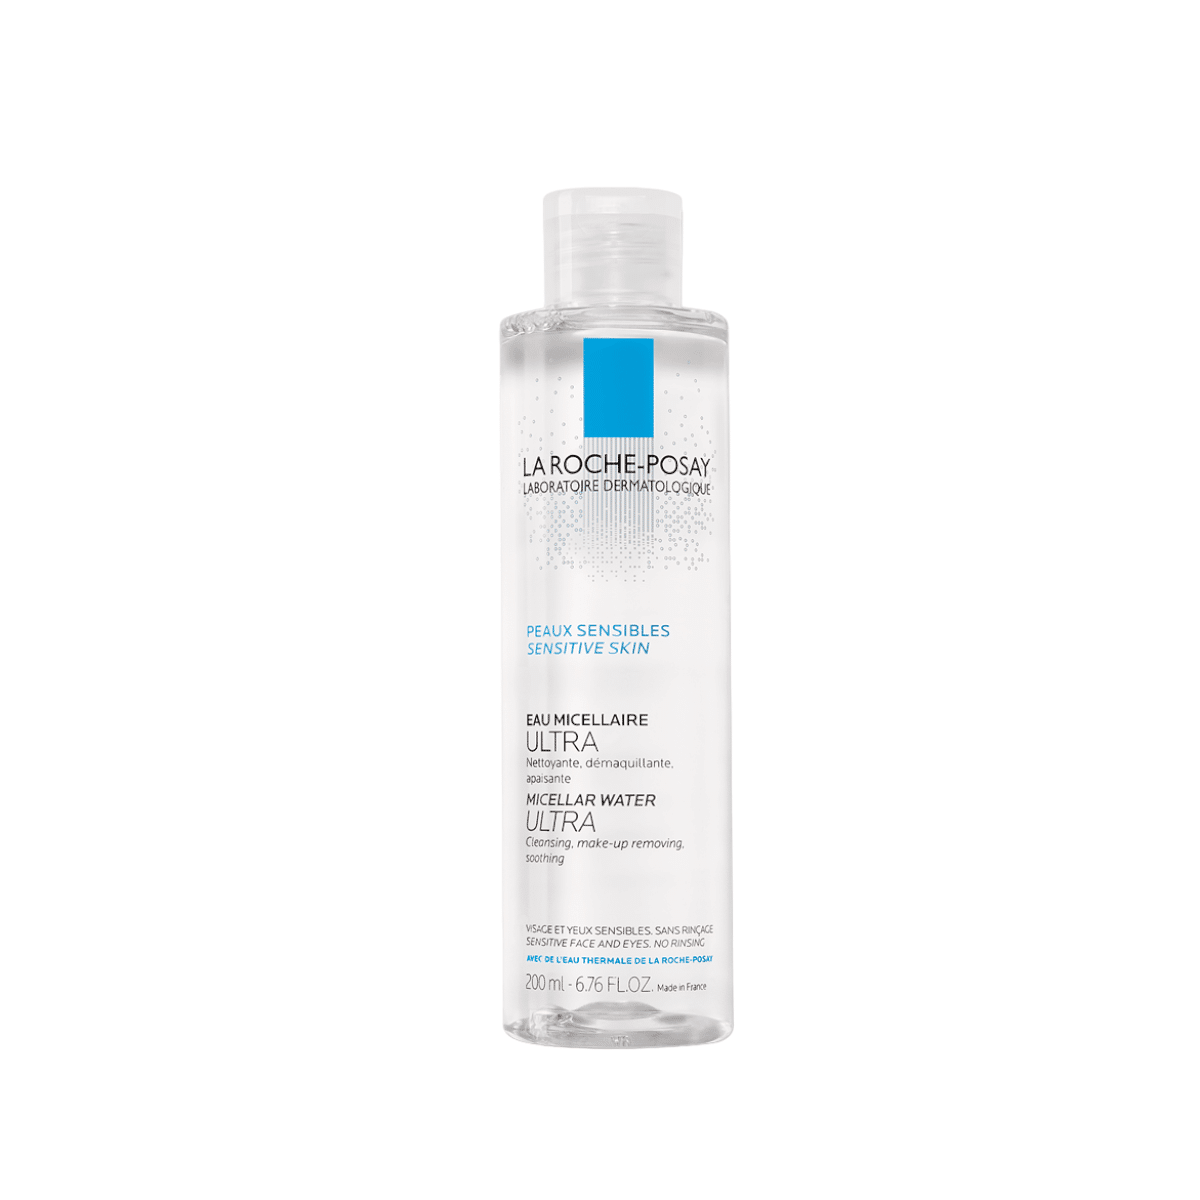 A bottle of La Roche-Posay Ultra Micellar Solution 200ml on a white background.